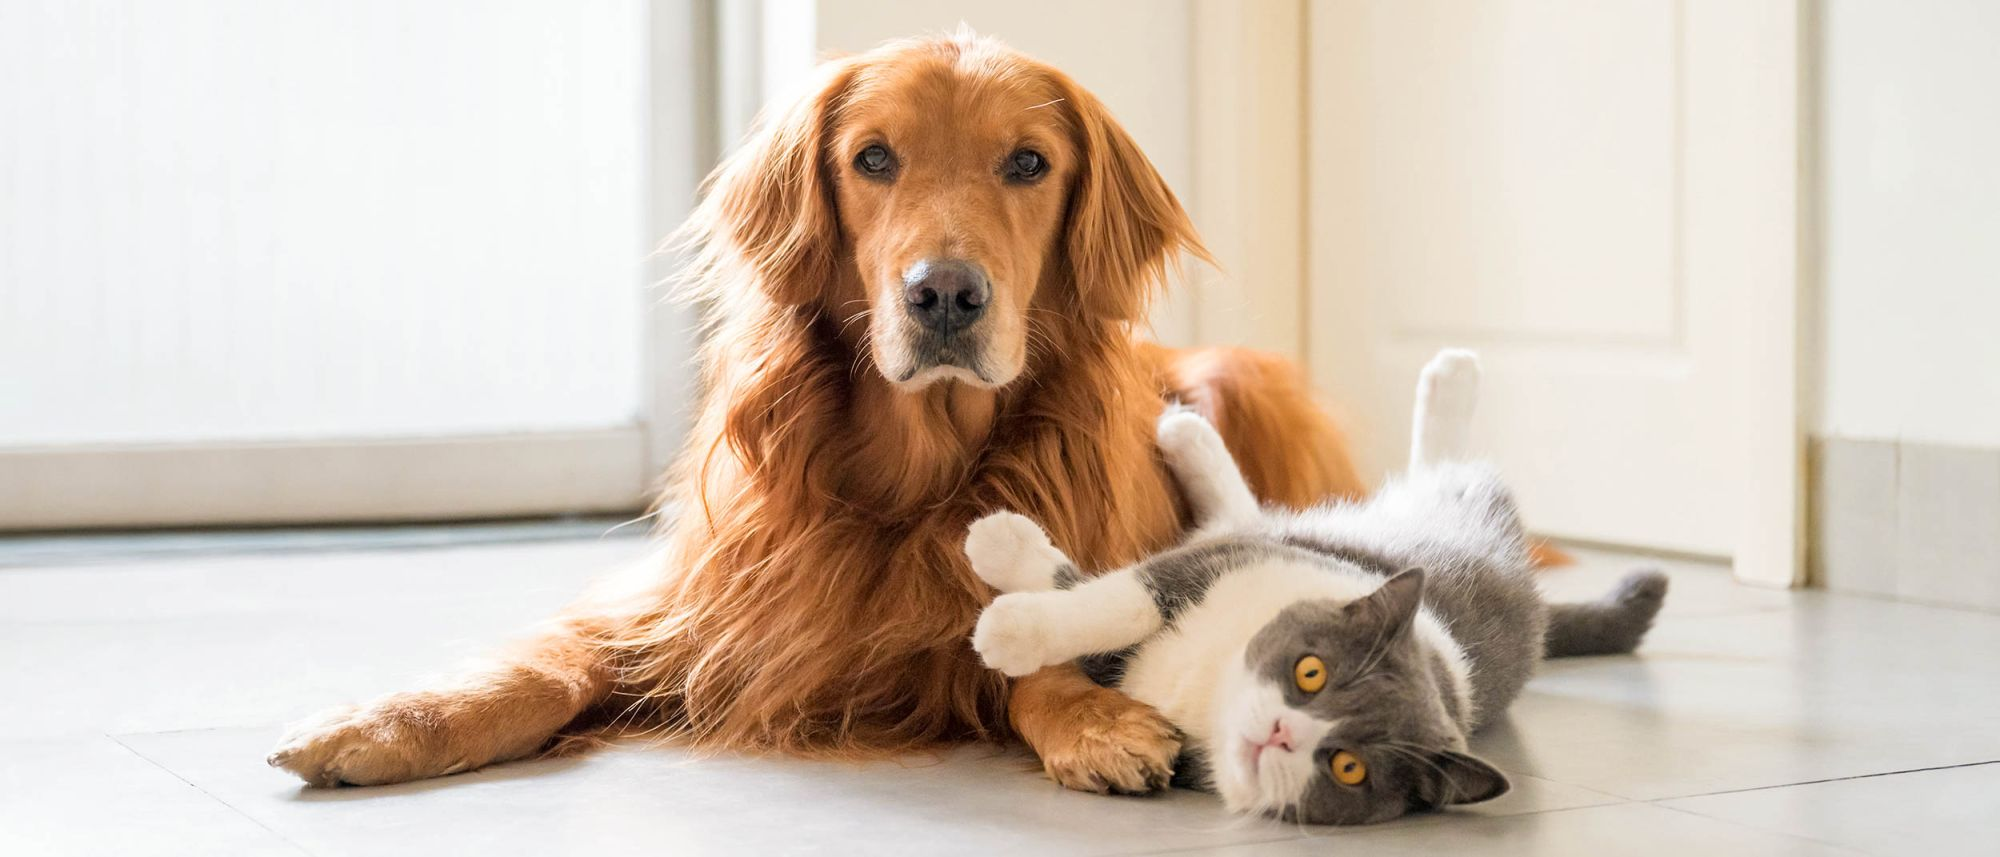 Adult cat and dog lying together indoors on a kitchen floor